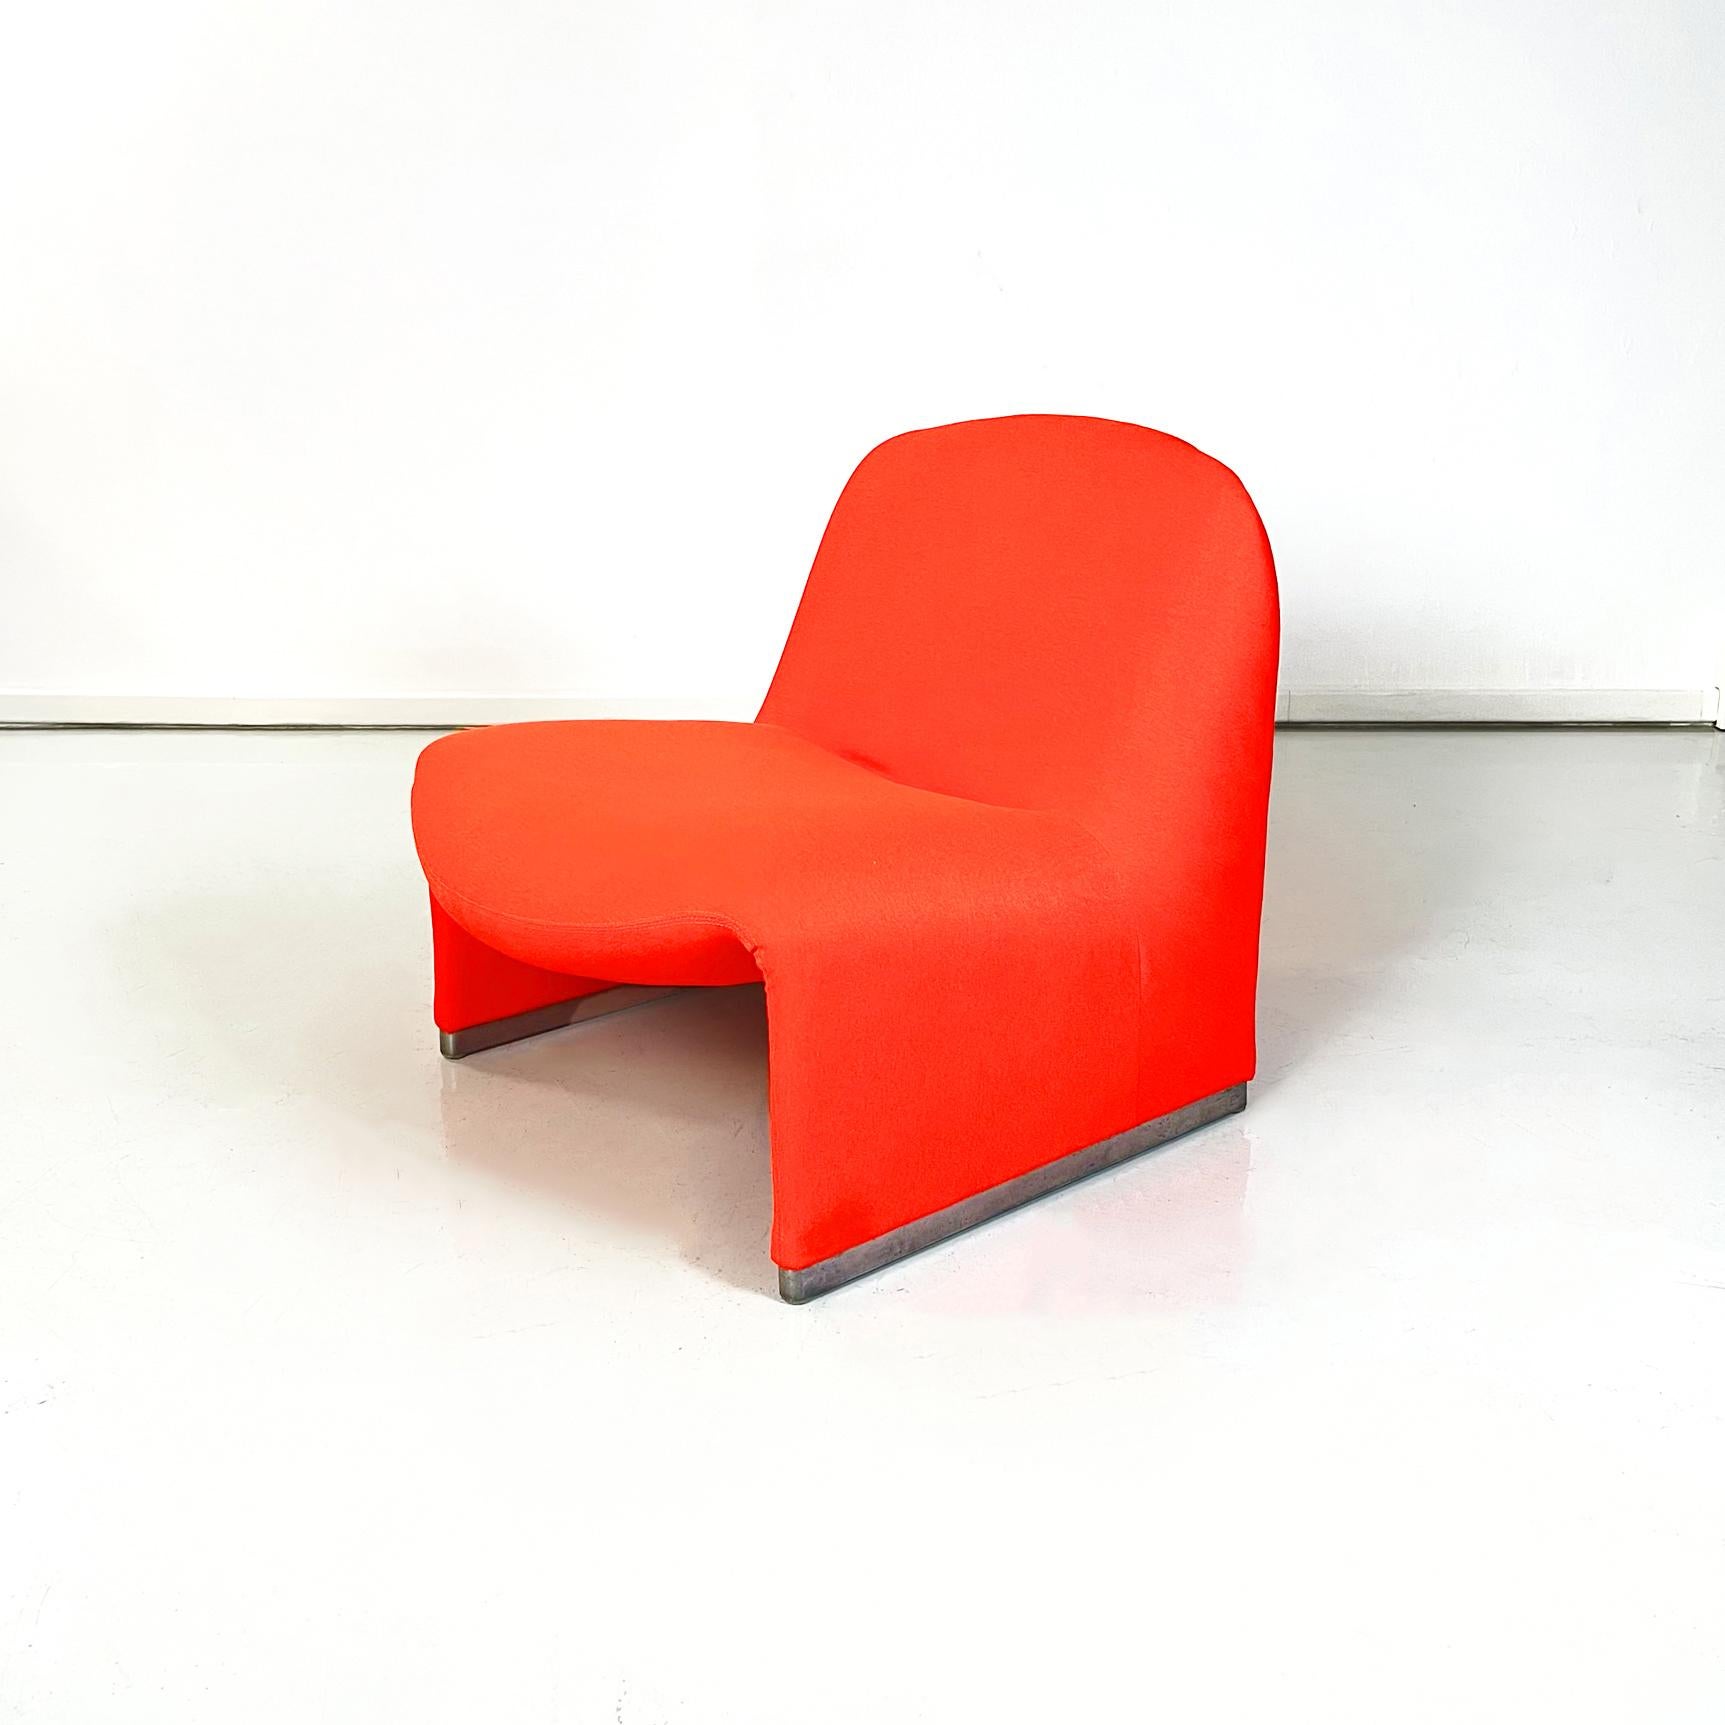 Italian modern Red chairs mod. Alky by Giancarlo Piretti for Anonima Castelli, 1970s
Pair of armchairs mod. Alky fully padded and covered in very bright red-orange fabric. The two legs have metal feet.
Produced by Anonima Castelli in 1970s and